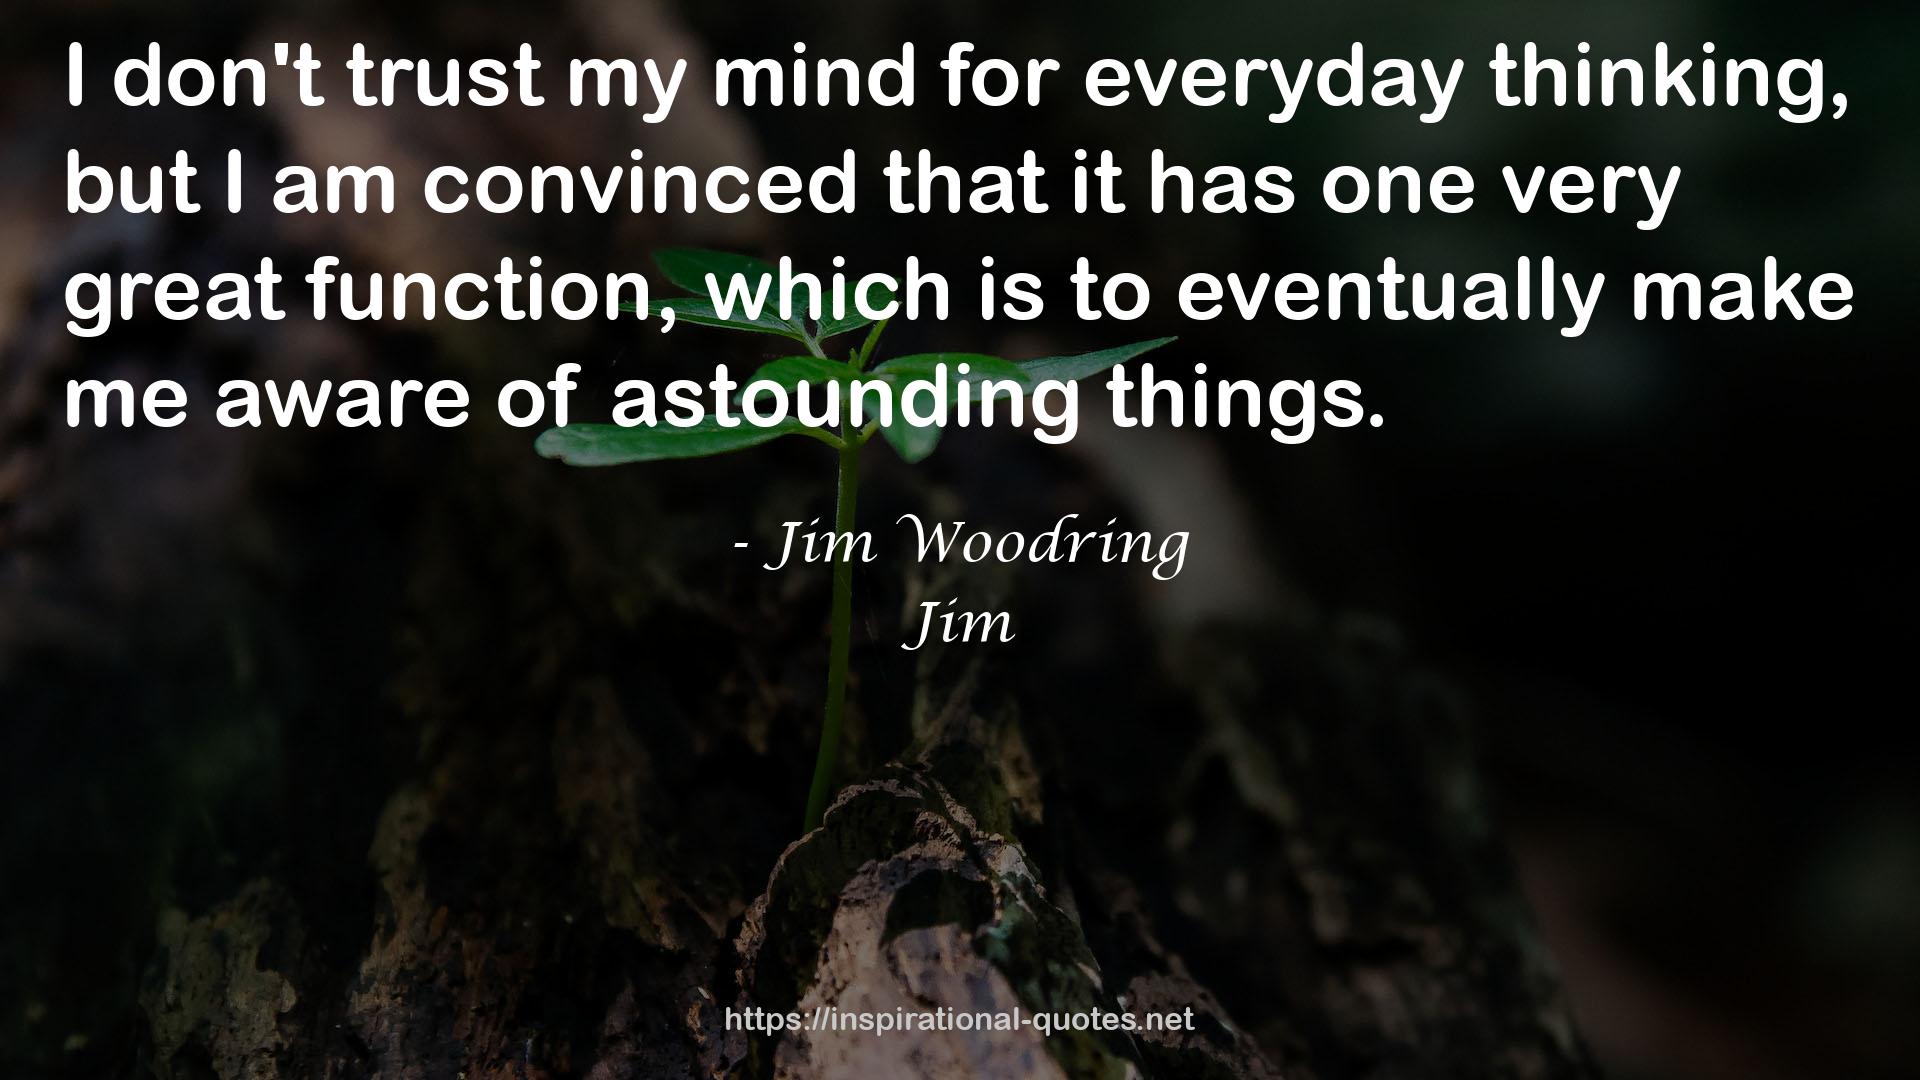 Jim Woodring QUOTES